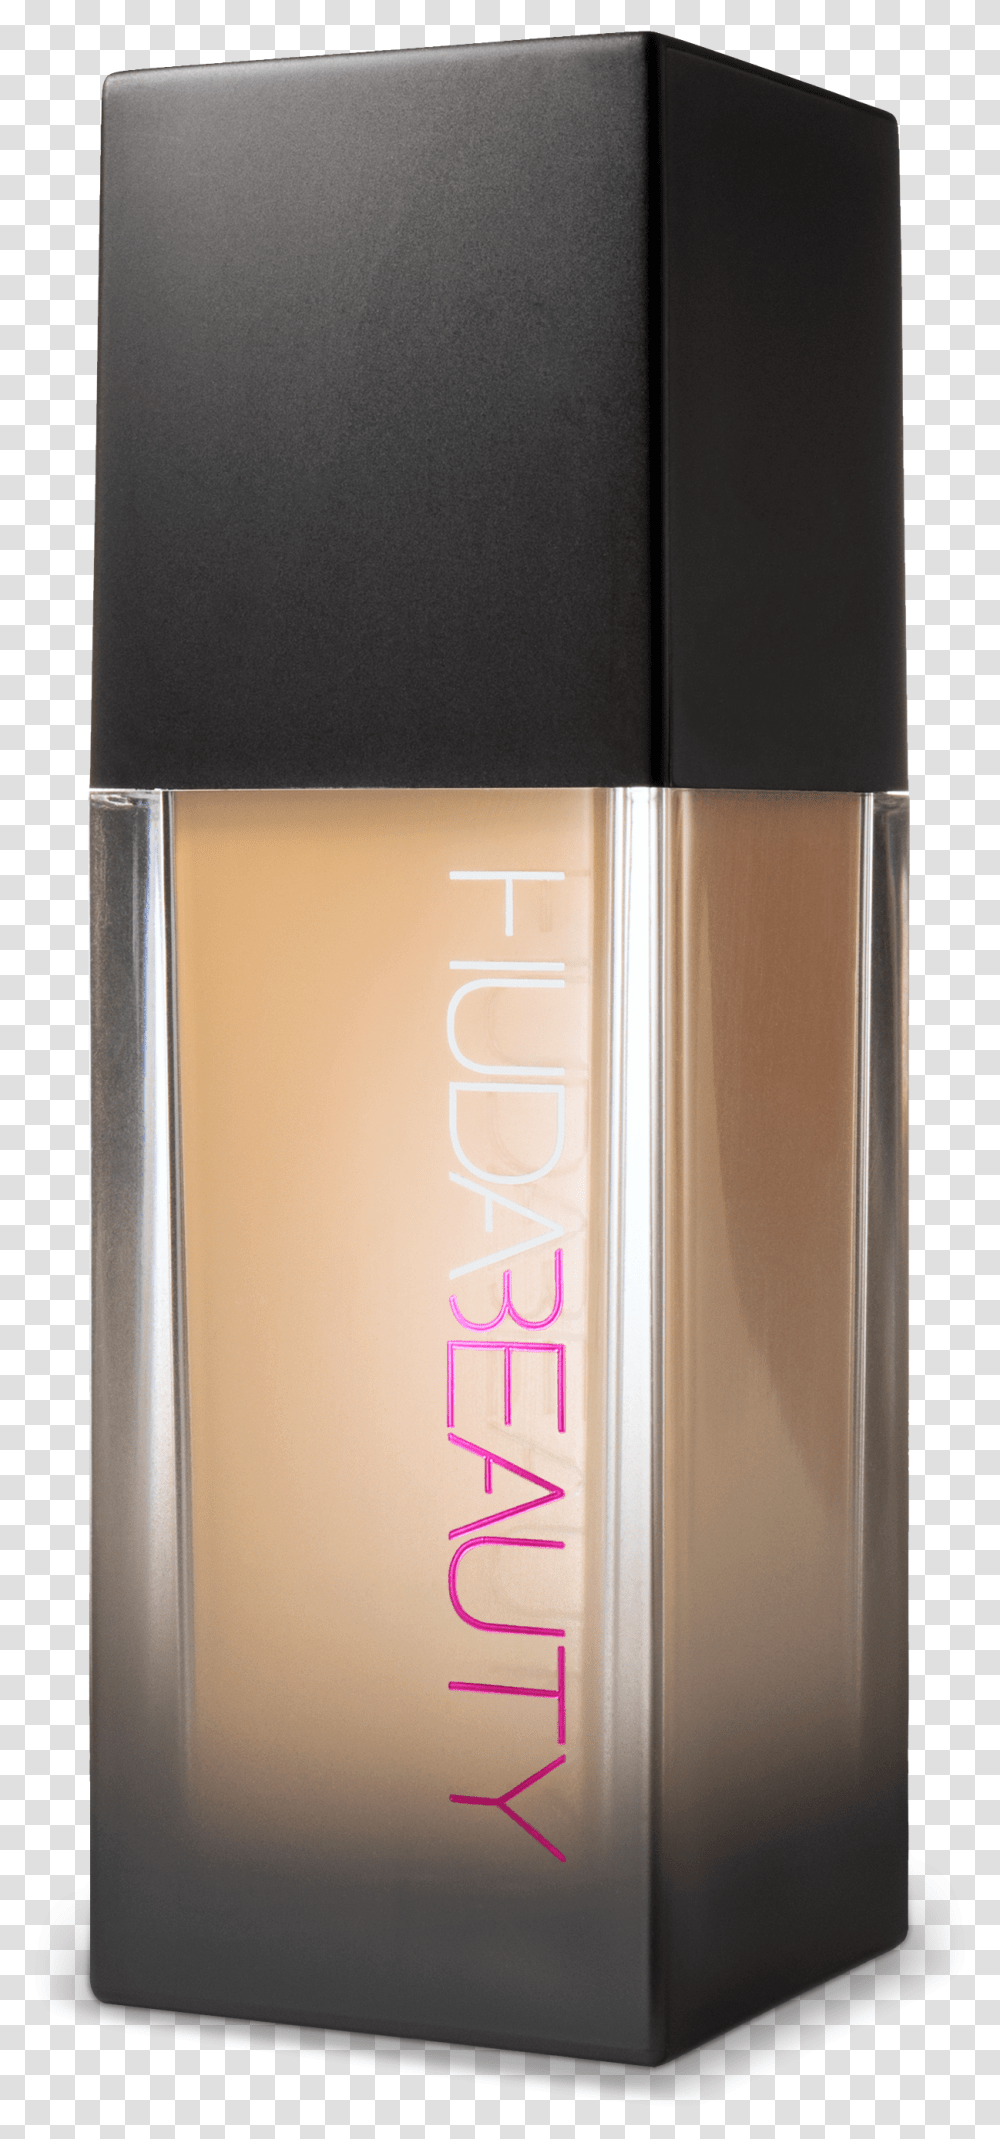 Fauxfilter Foundation Hi Res Huda Beauty Foundation Prix Tunisie, Bottle, Cosmetics, Perfume, Aftershave Transparent Png